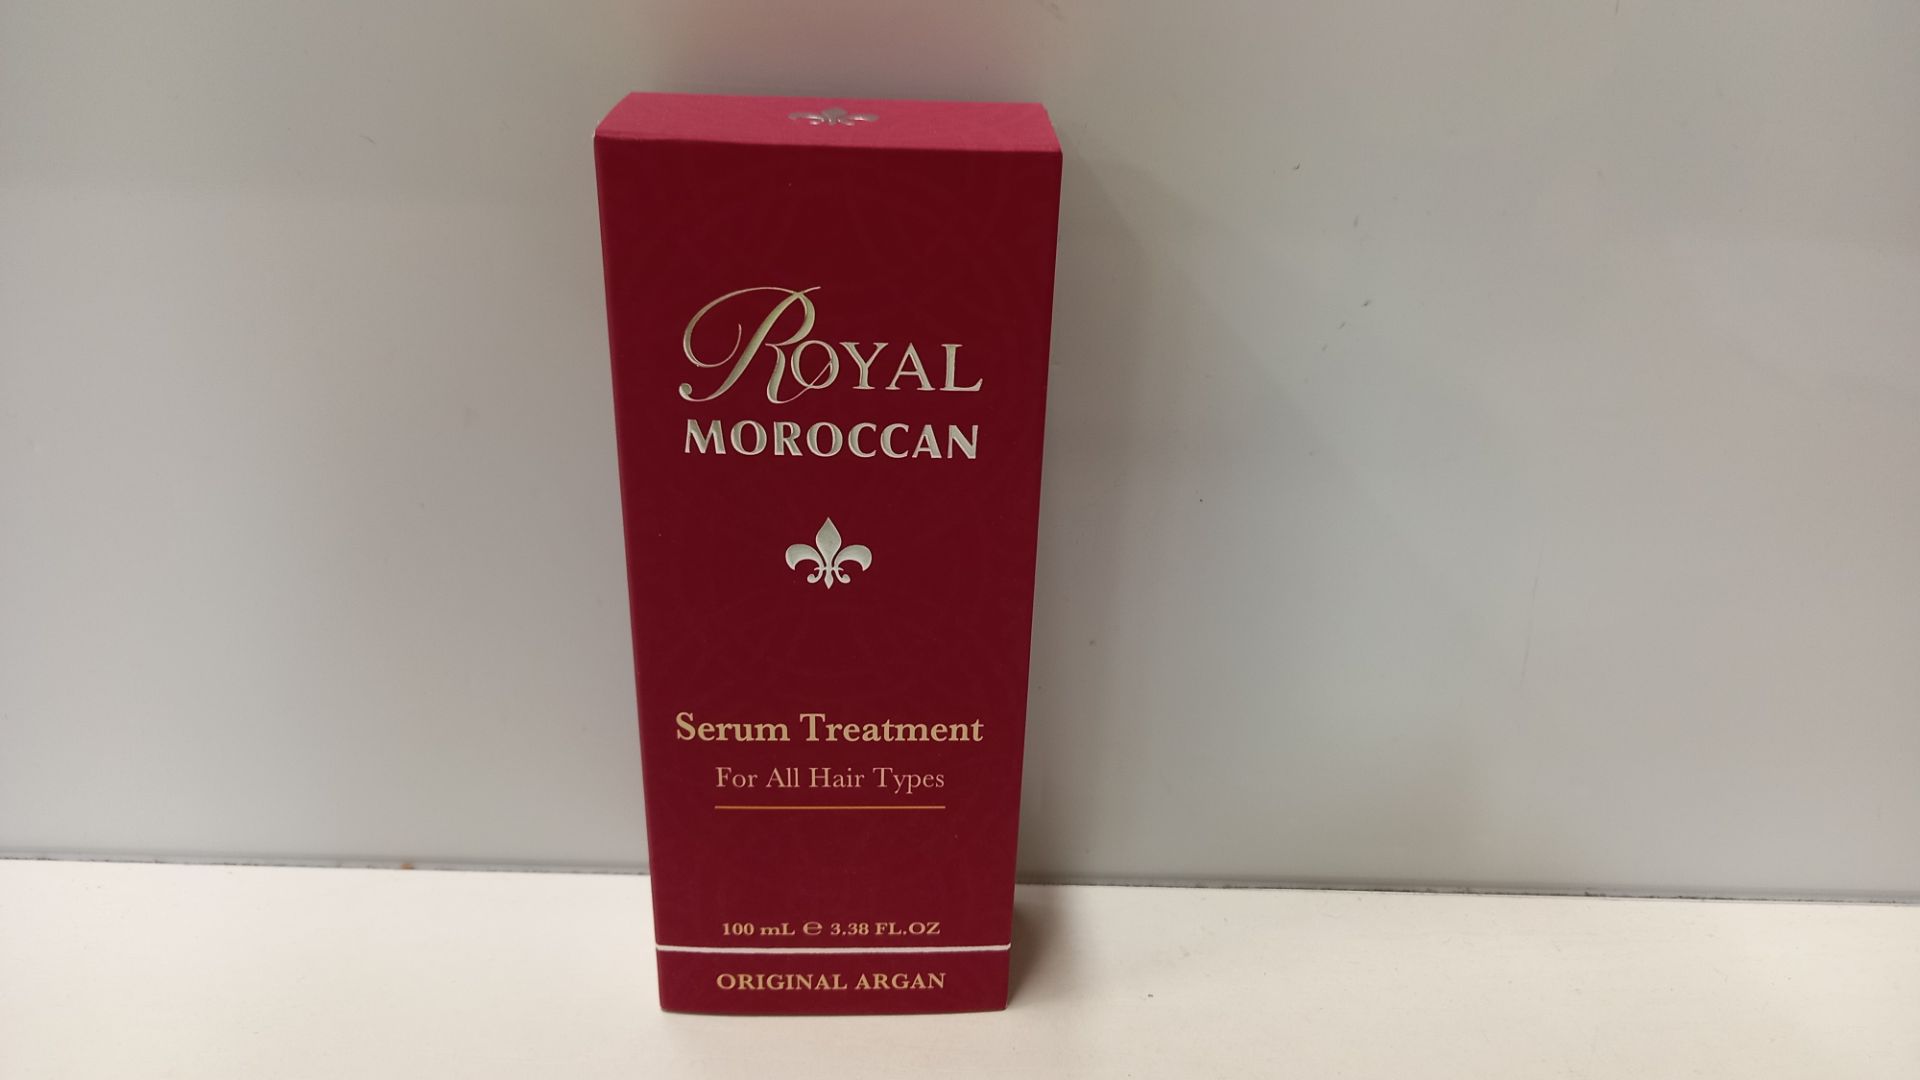 24 X BRAND NEW ROYAL MOROCCAN SERUM TREATMENT FOR ALL HAIR TYPES (100ML) - PICK LOOSE